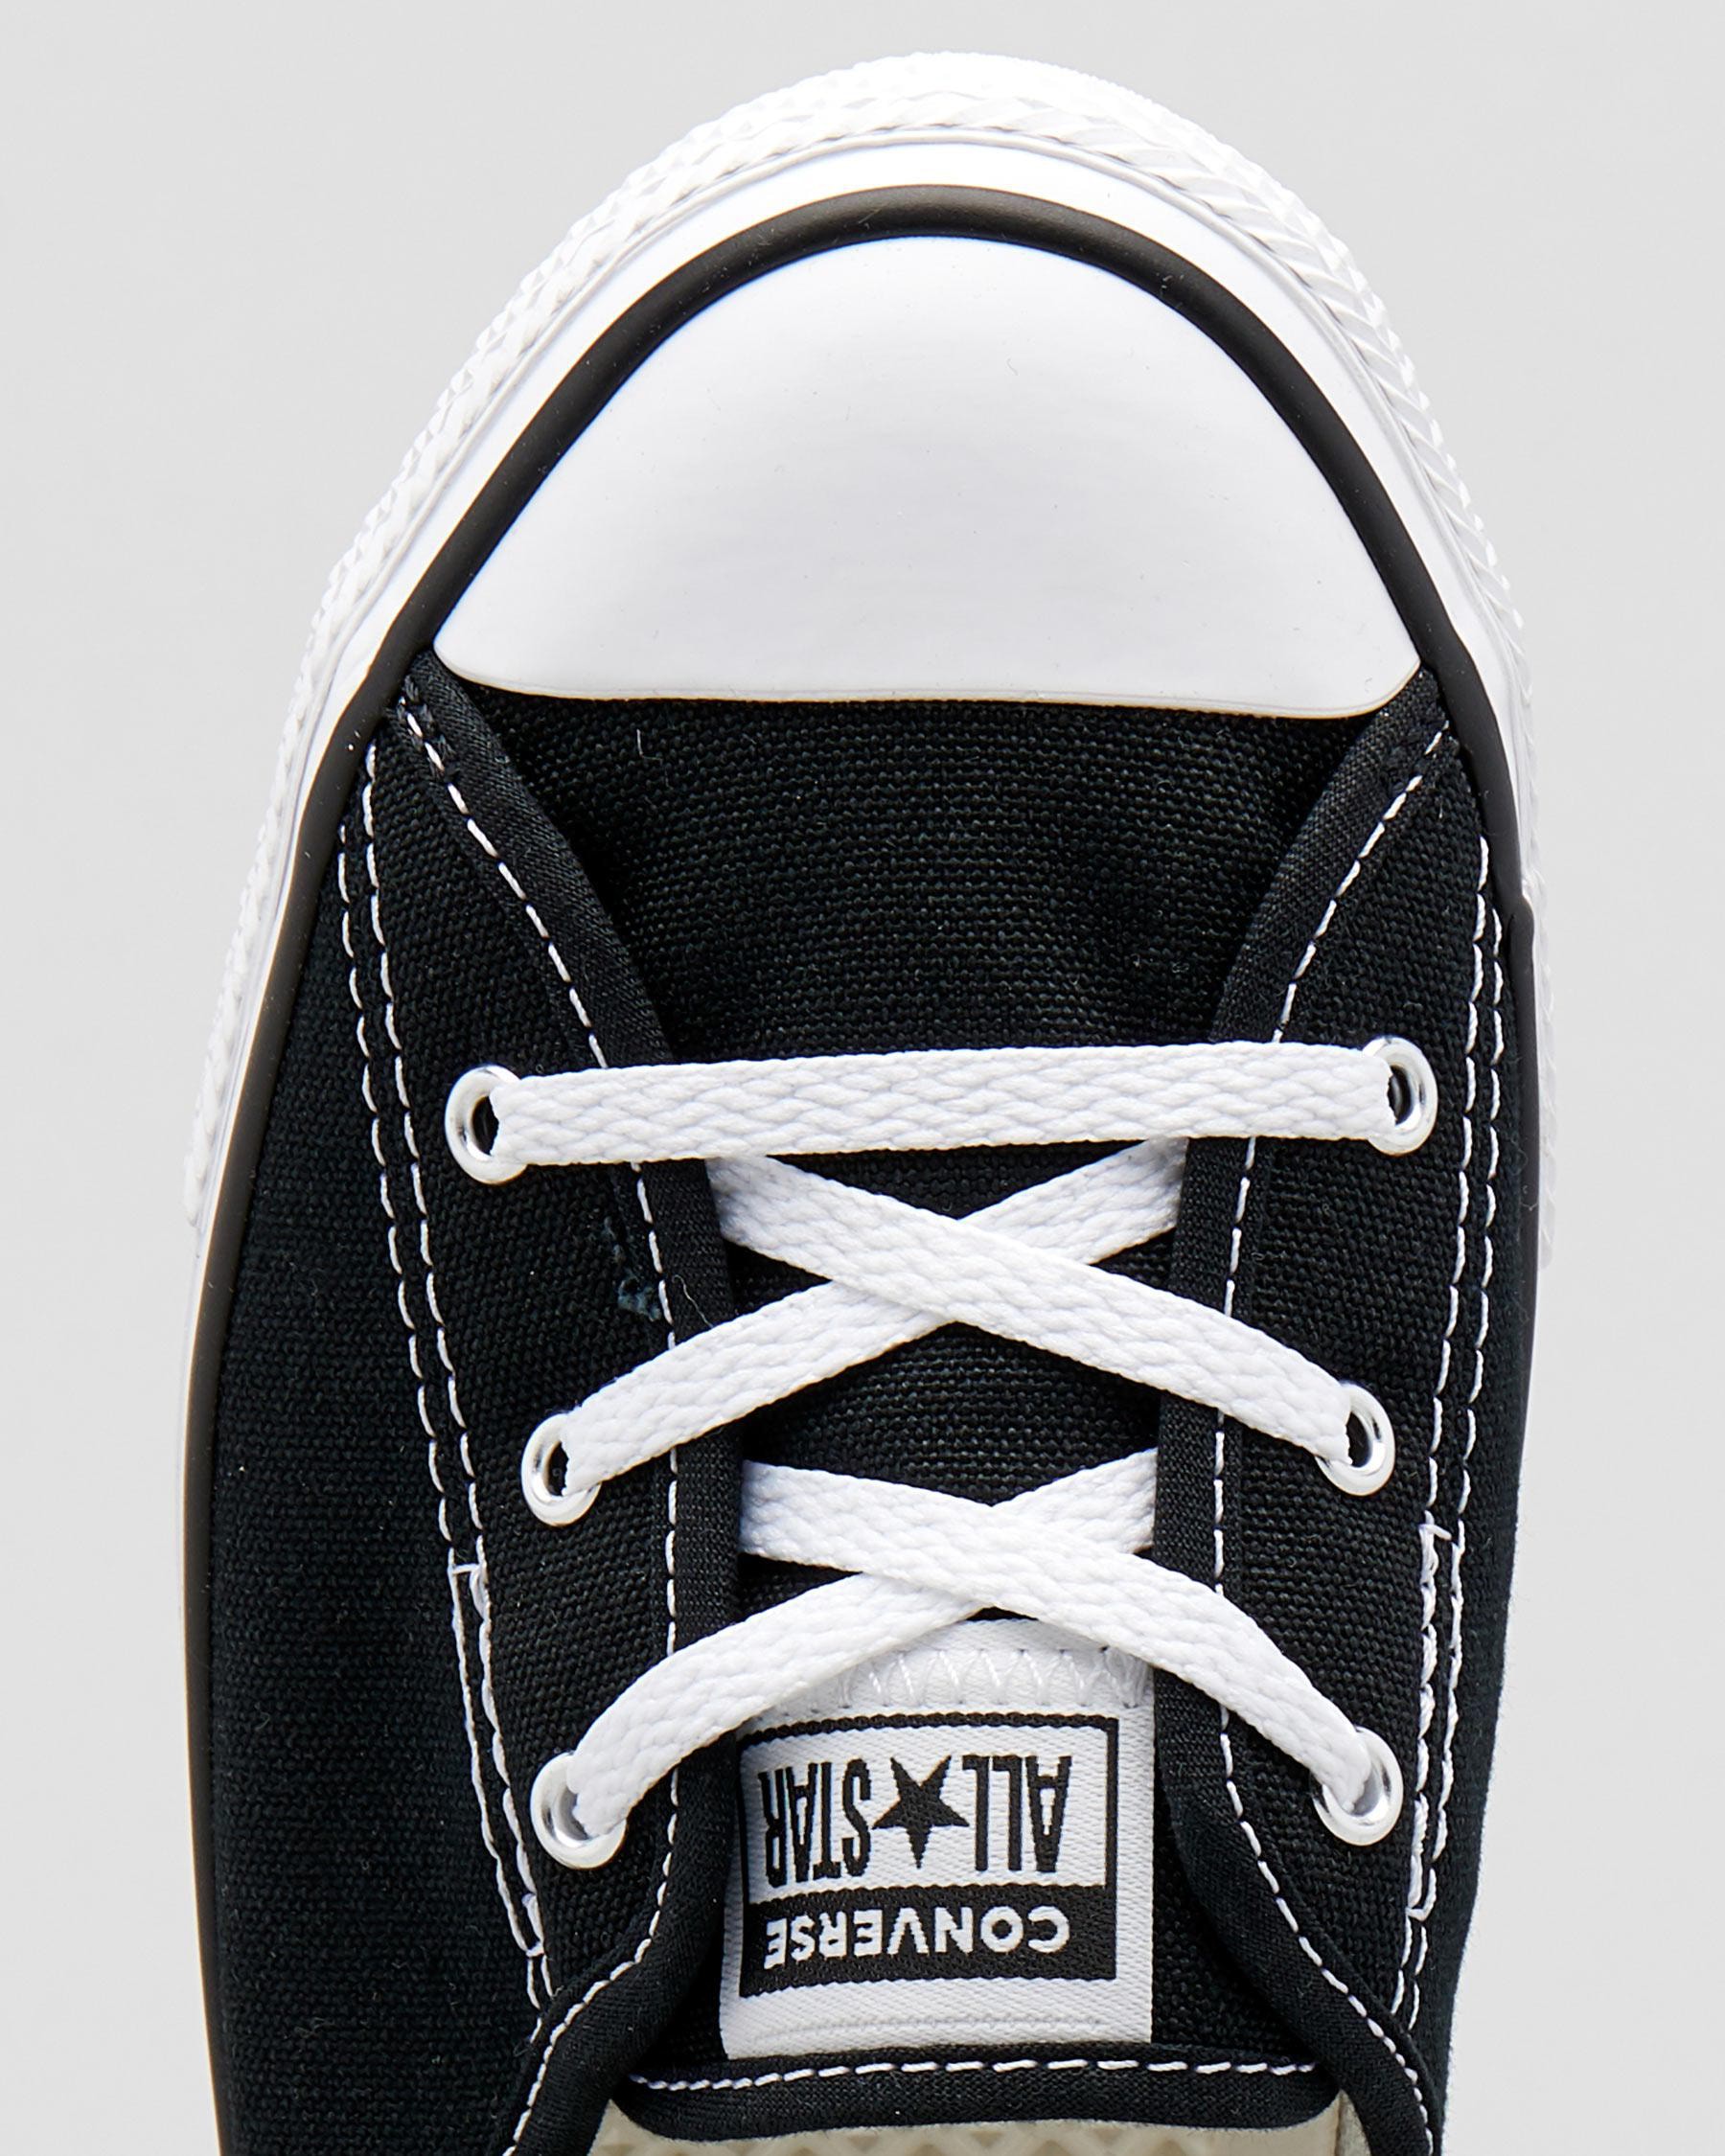 Converse Womens Chuck Taylor Ballet Lace Low Shoes In Black/white/black - Fast & Easy Returns - Beach United States